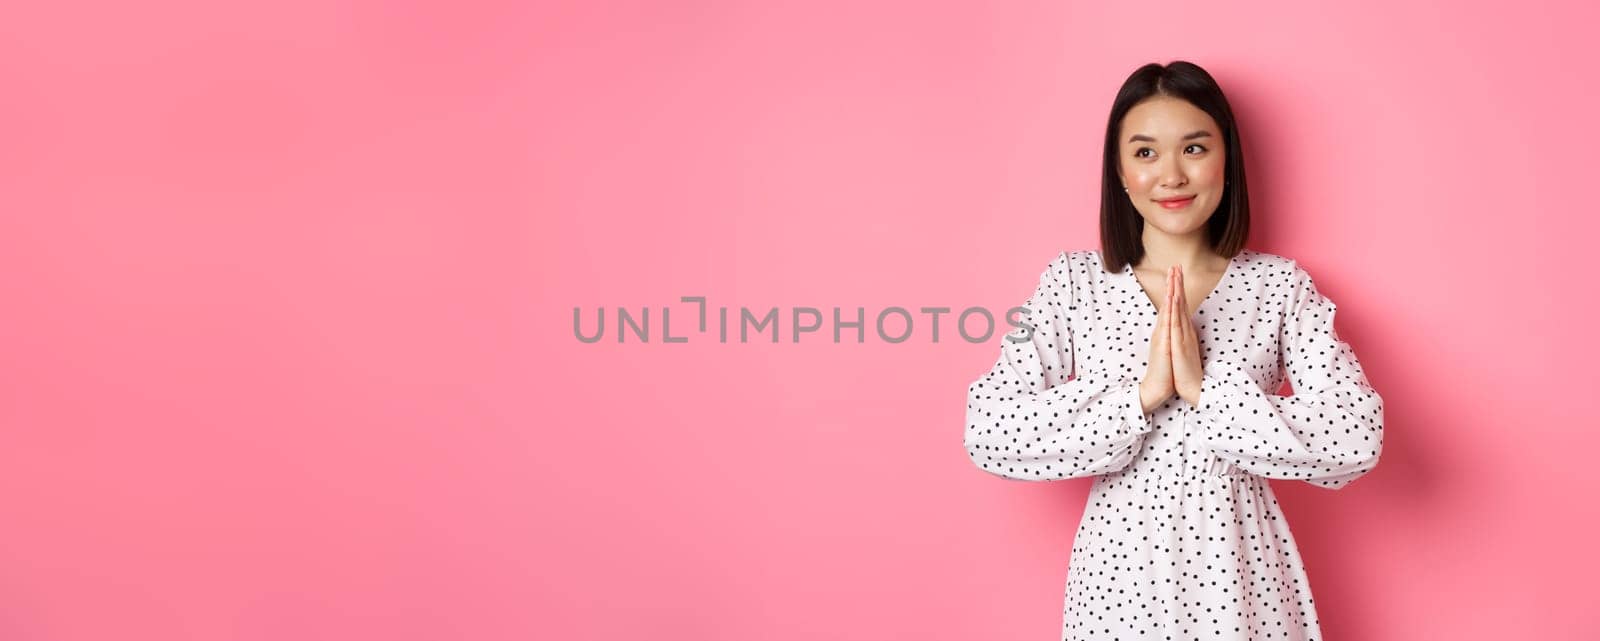 Beautiful angelic asian woman smiling, holding hands in pray and looking left at copy space with innocent cute gaze, standing over pink background.